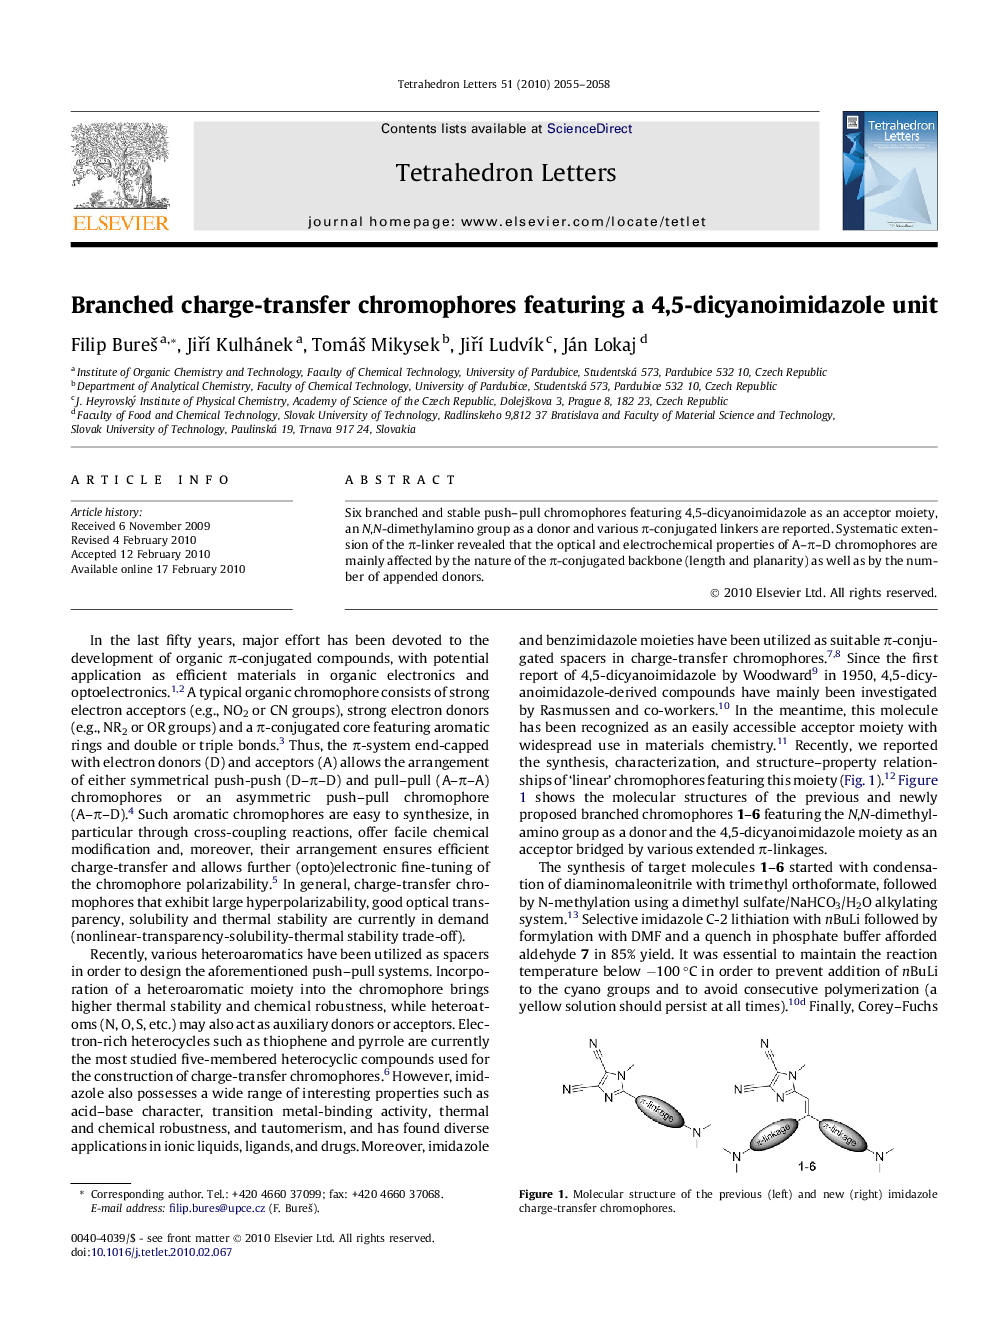 Branched charge-transfer chromophores featuring a 4,5-dicyanoimidazole unit